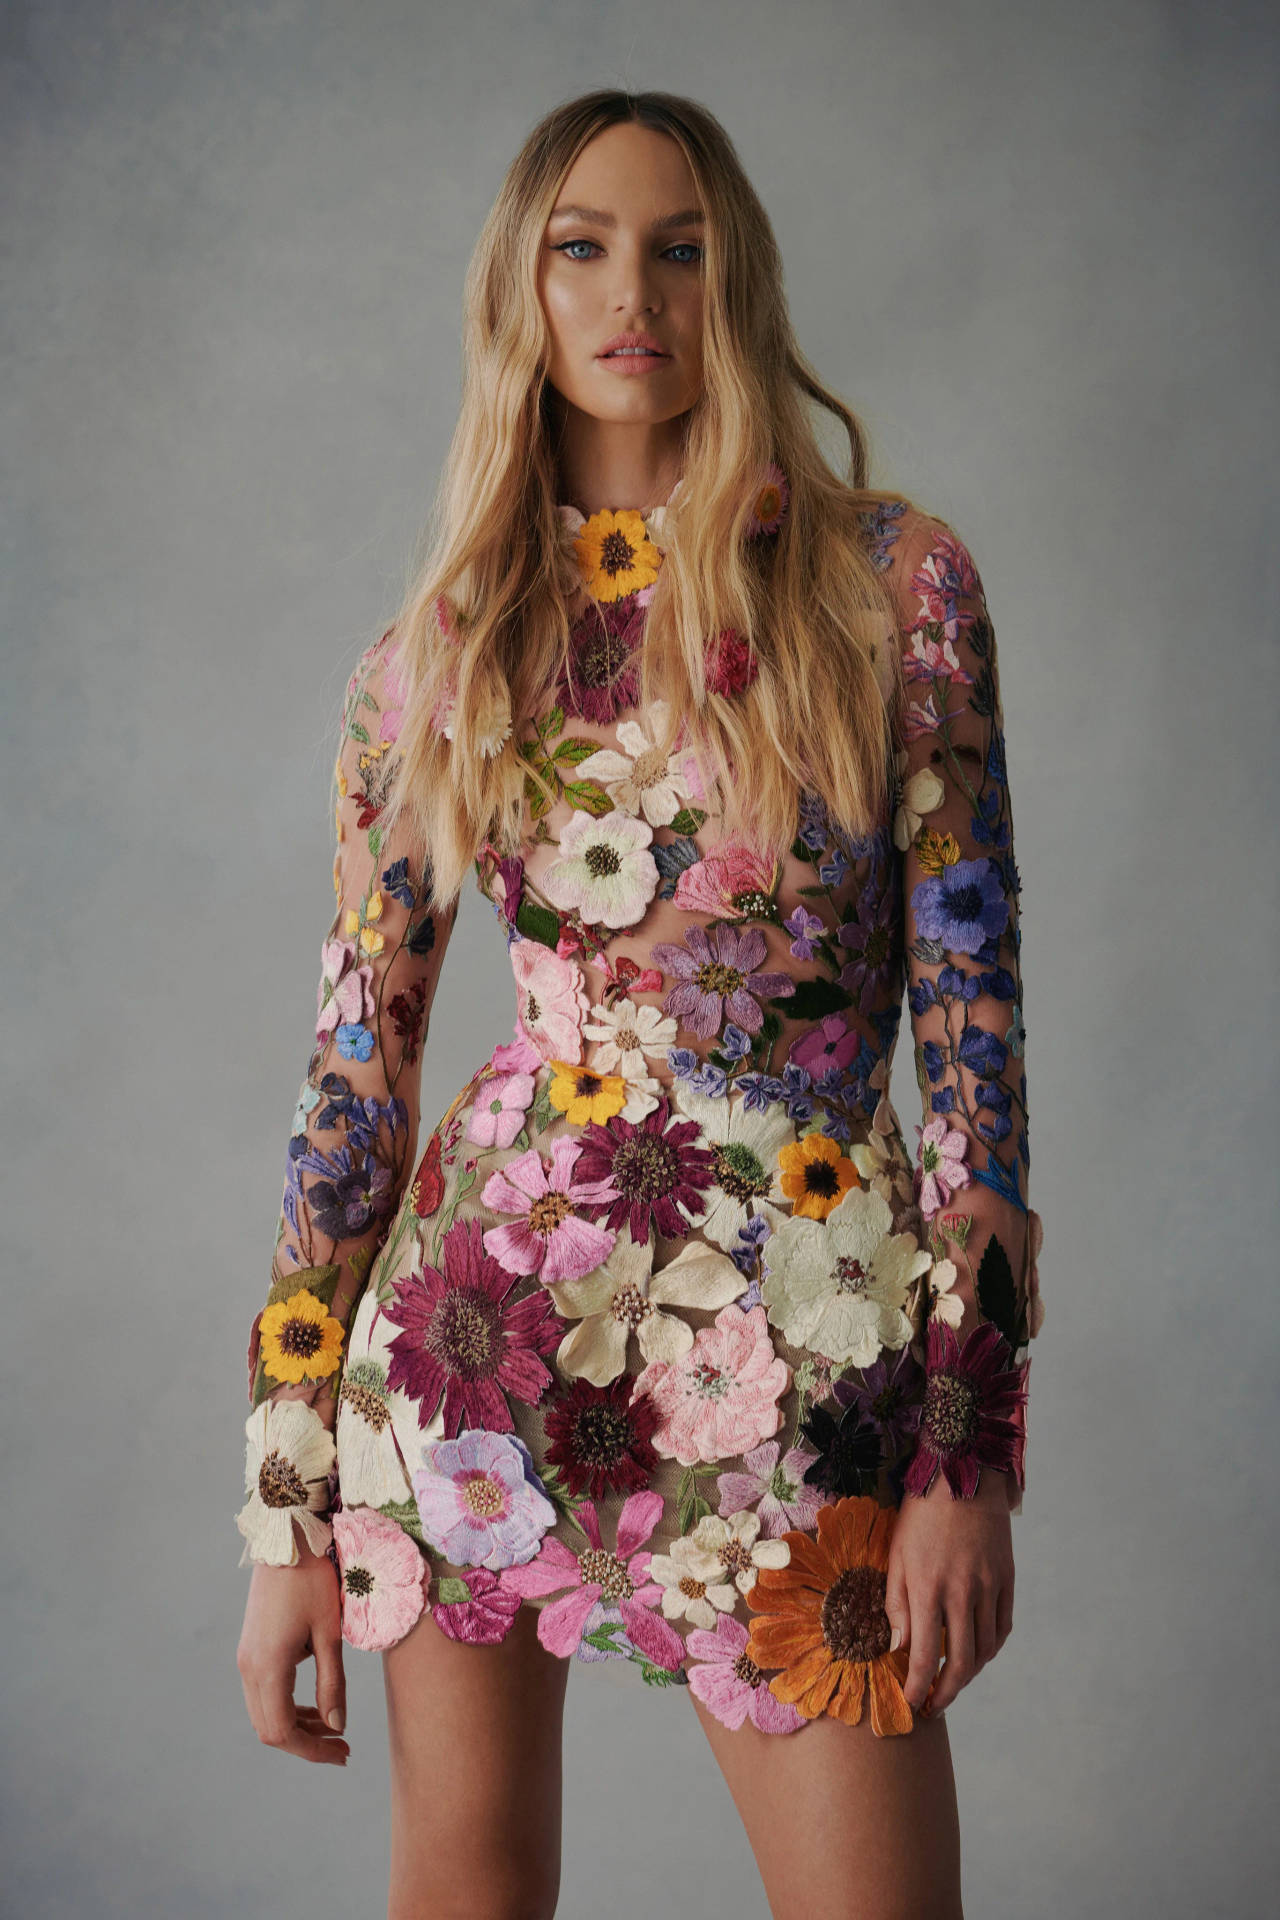 Candice Swanepoel Floral Dress